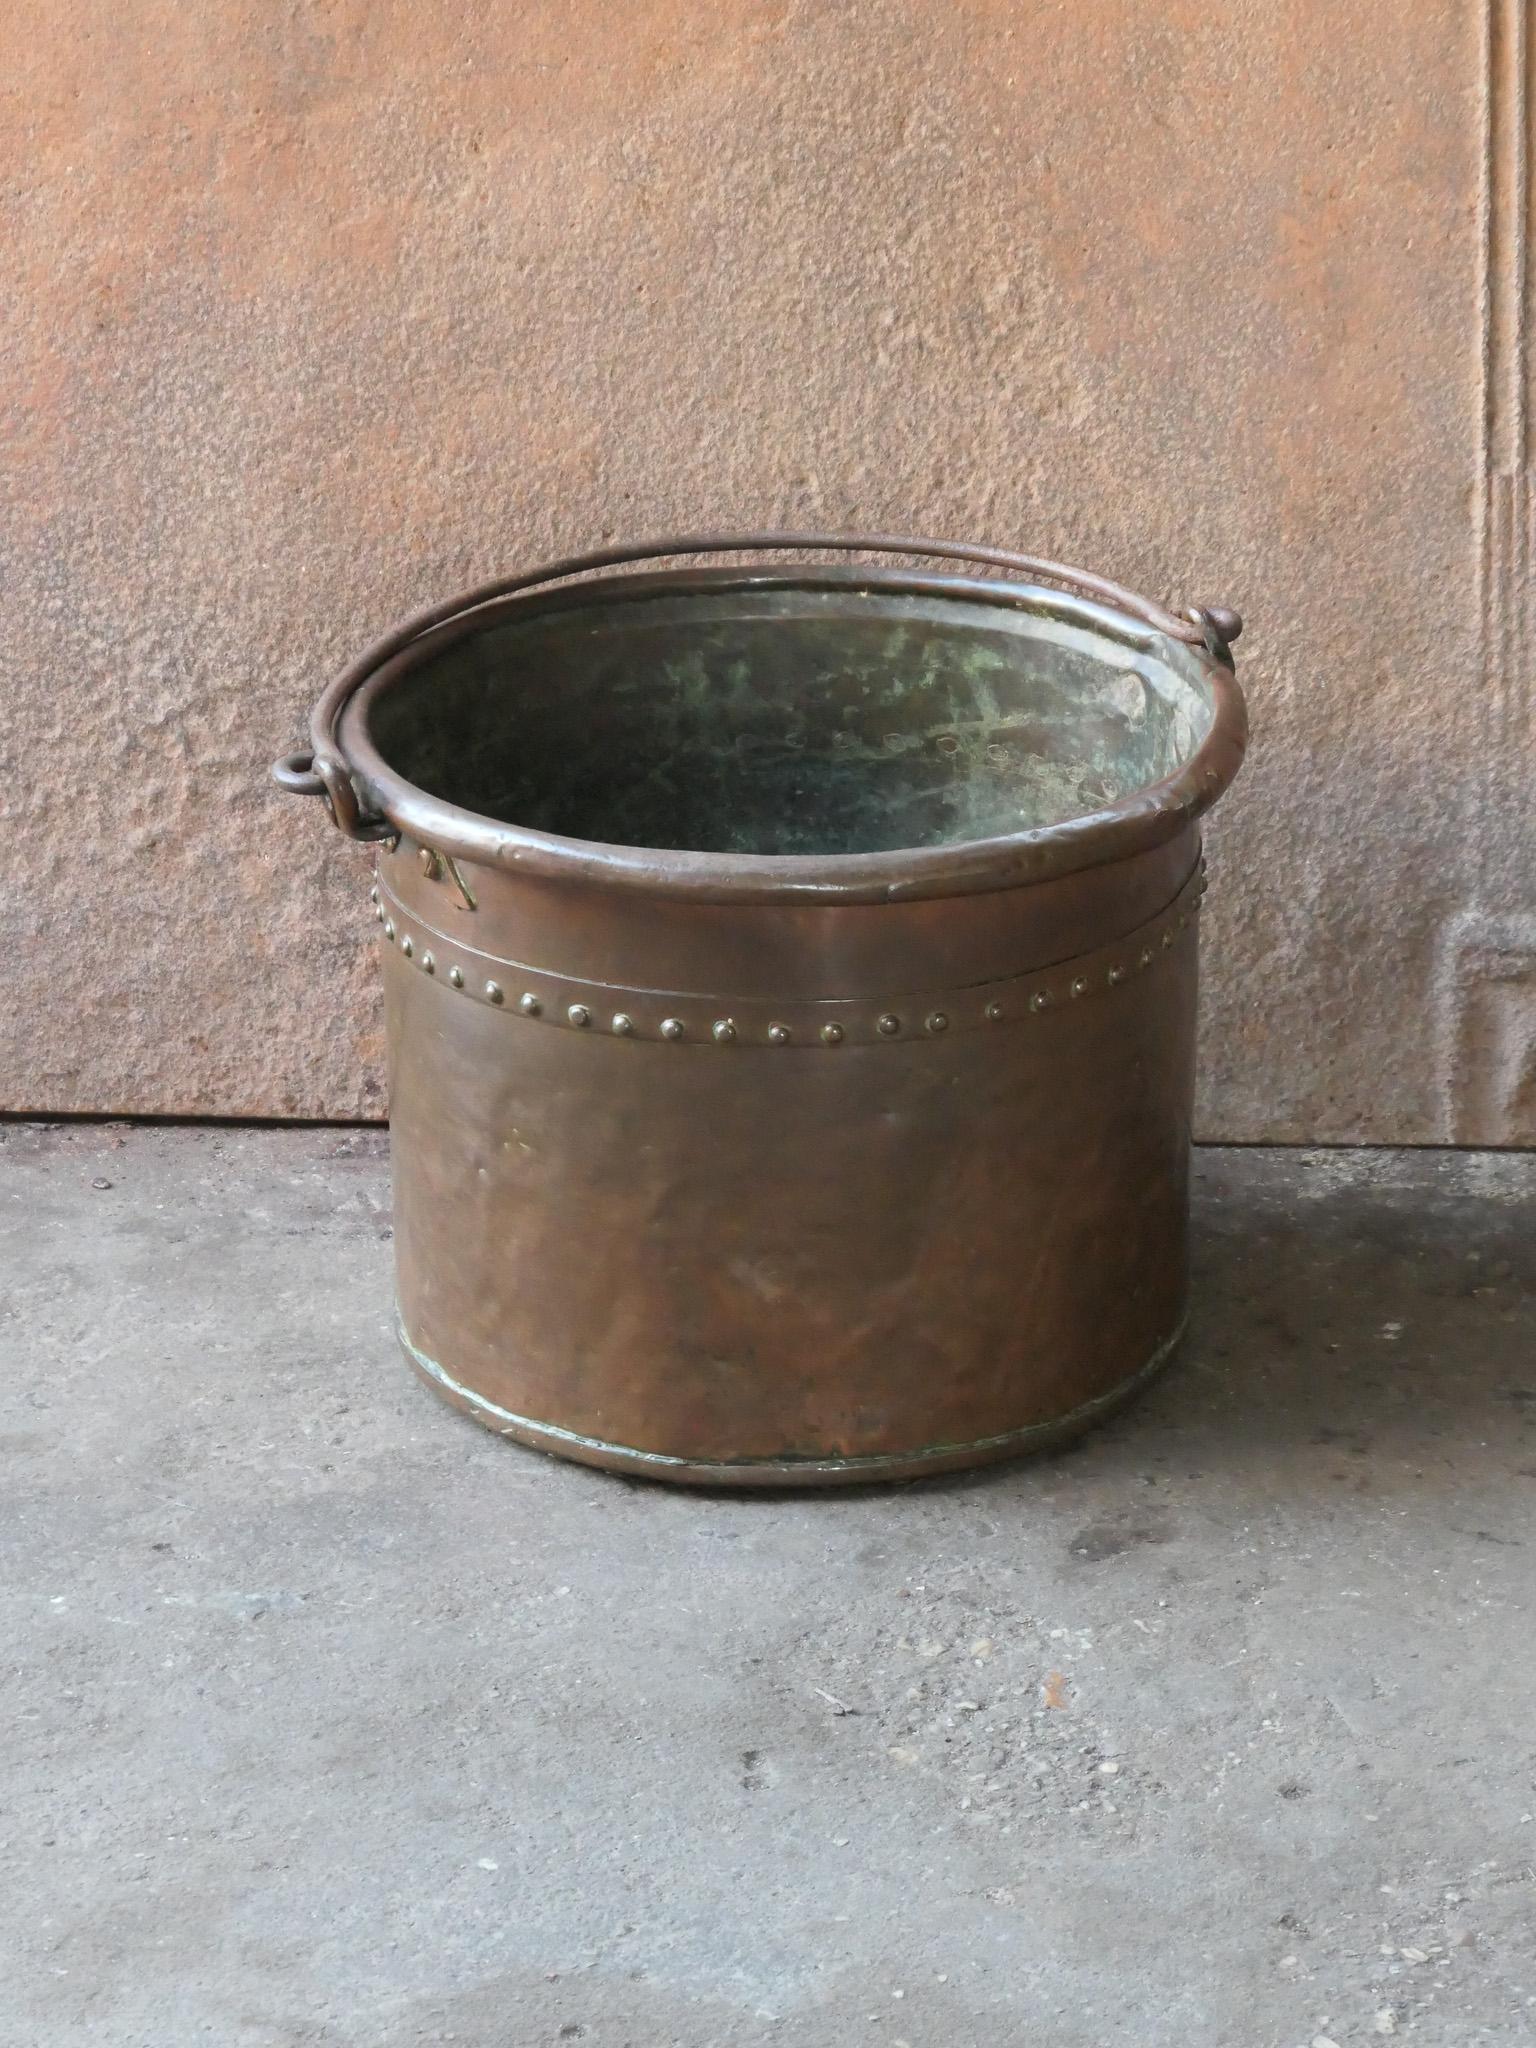 19th century Dutch Napoleon III firewood basket holder. The log holder is made copper with a wrought iron handle. Also called 'Frisian nail bucket'. Was used for the transport of milk.

The log holder is in a good condition and is fully functional.